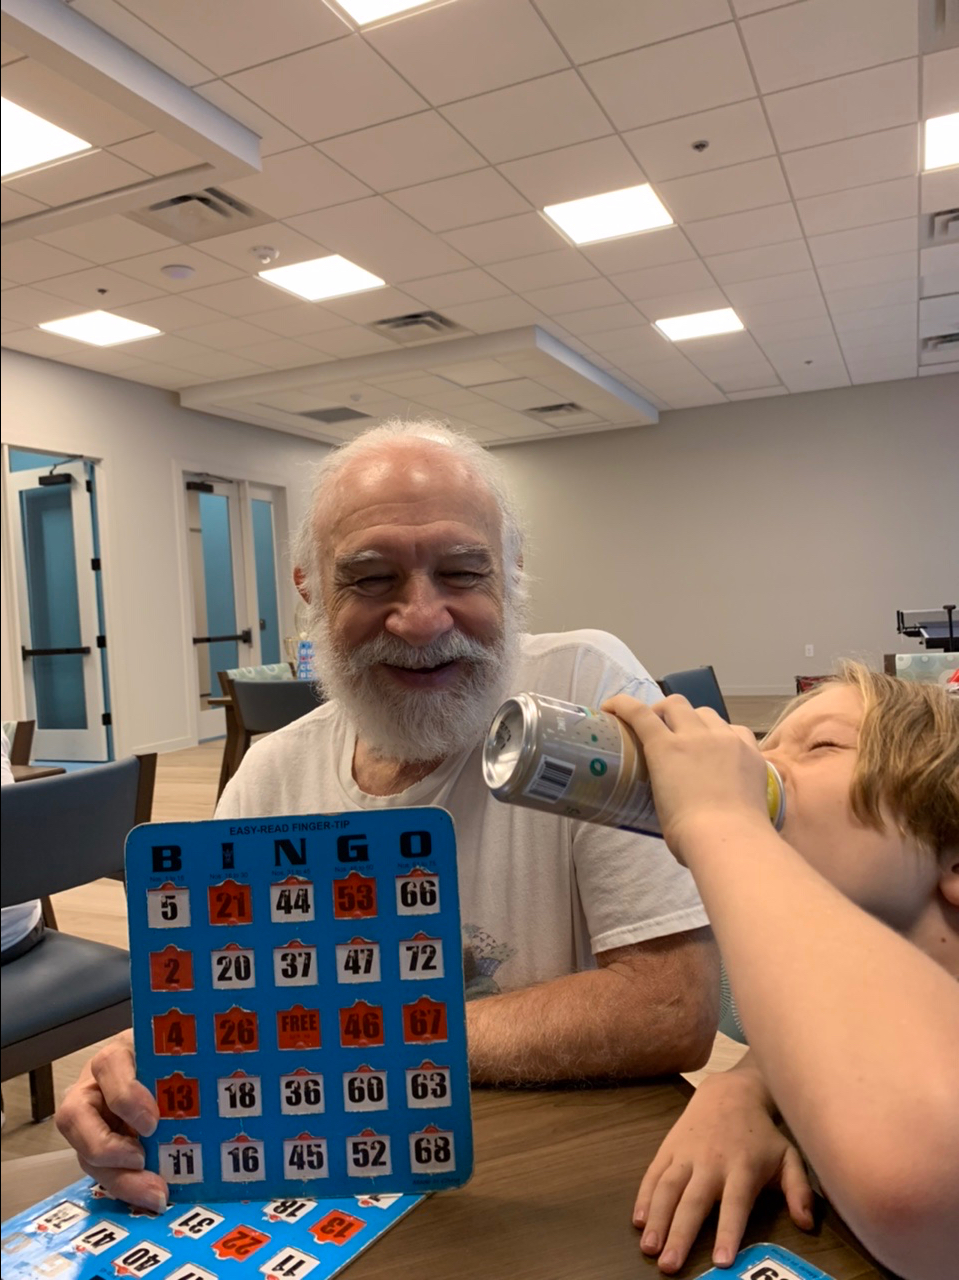 Playing Bingo with family & friends at The LadyBird 55+ community center, Austin Texas August 2022